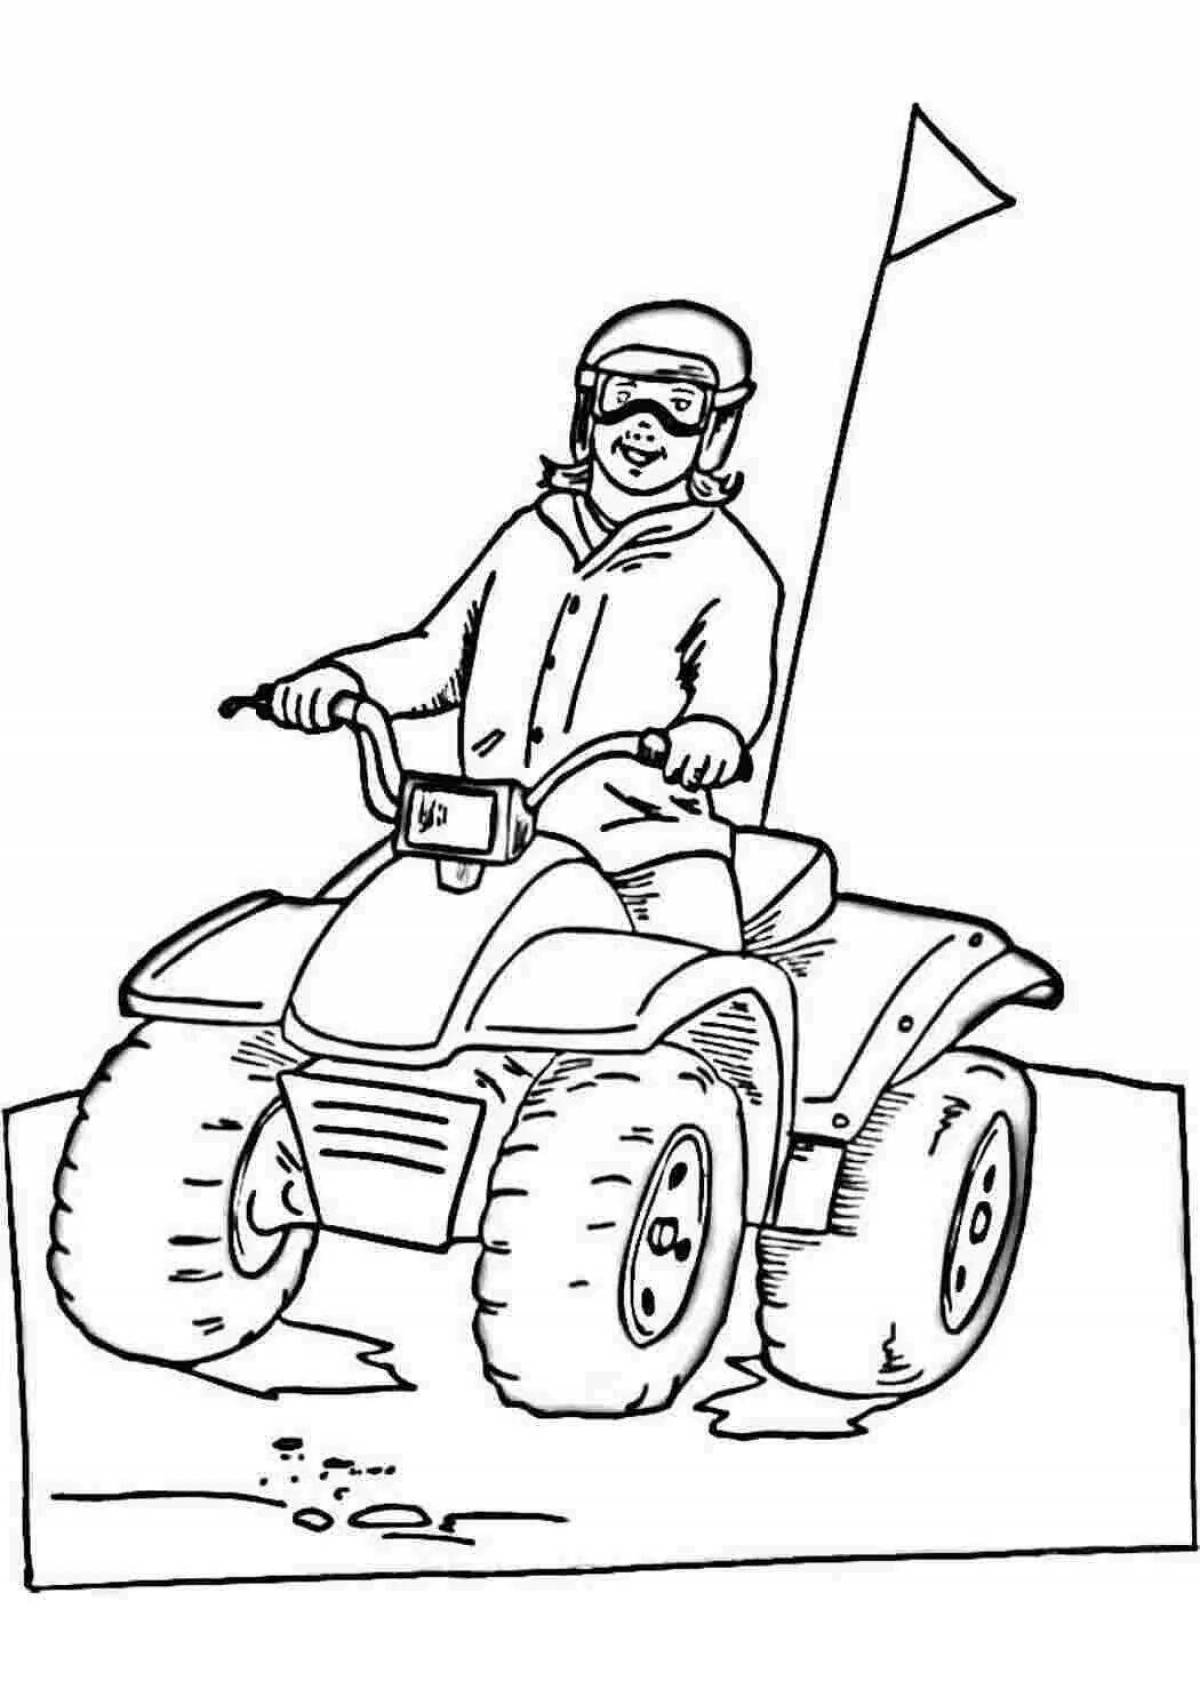 Bright ATV coloring pages for boys